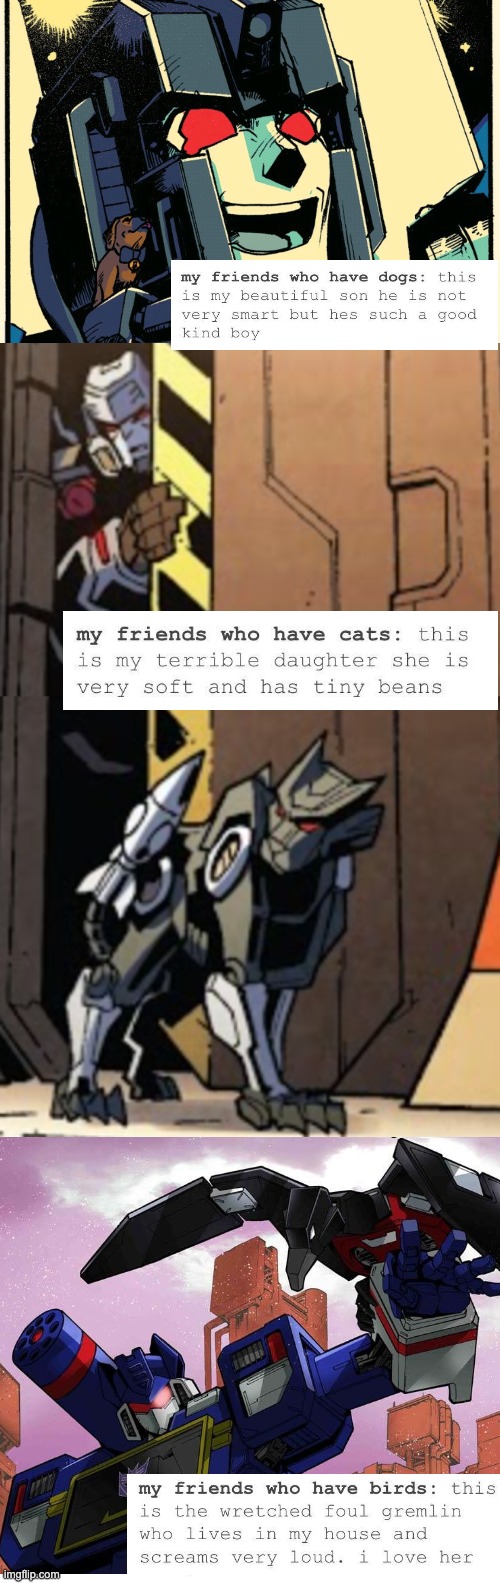 transformers pets | image tagged in pets,cat,transformers,comics,megatron,soundwave | made w/ Imgflip meme maker